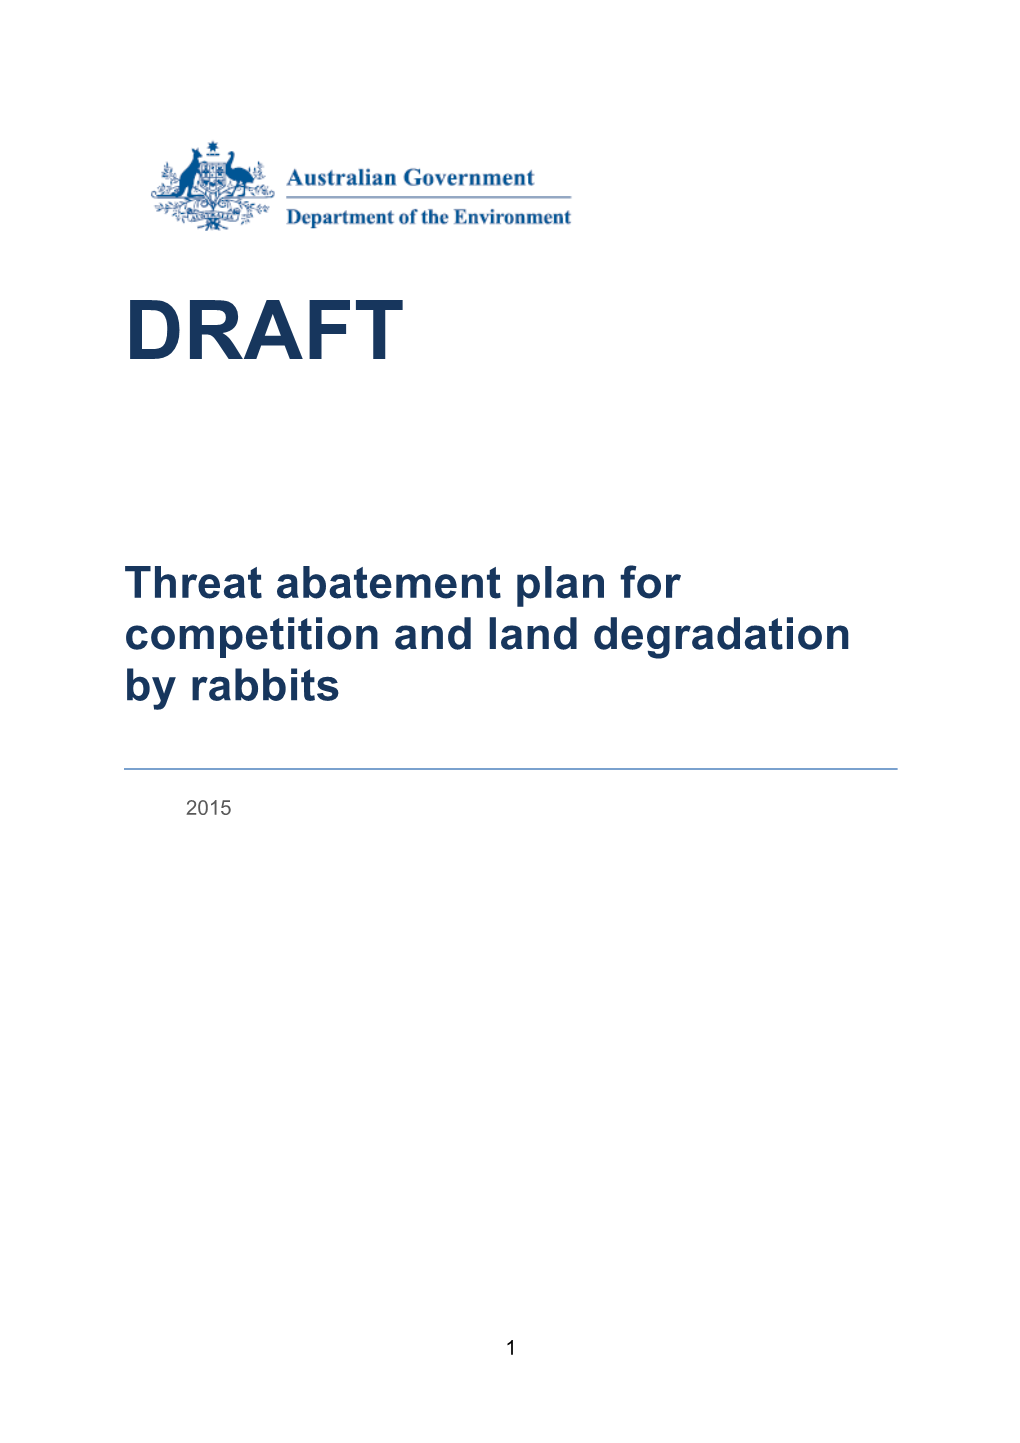 Draft Threat Abatement Plan for Competition and Land Degradation by Rabbits